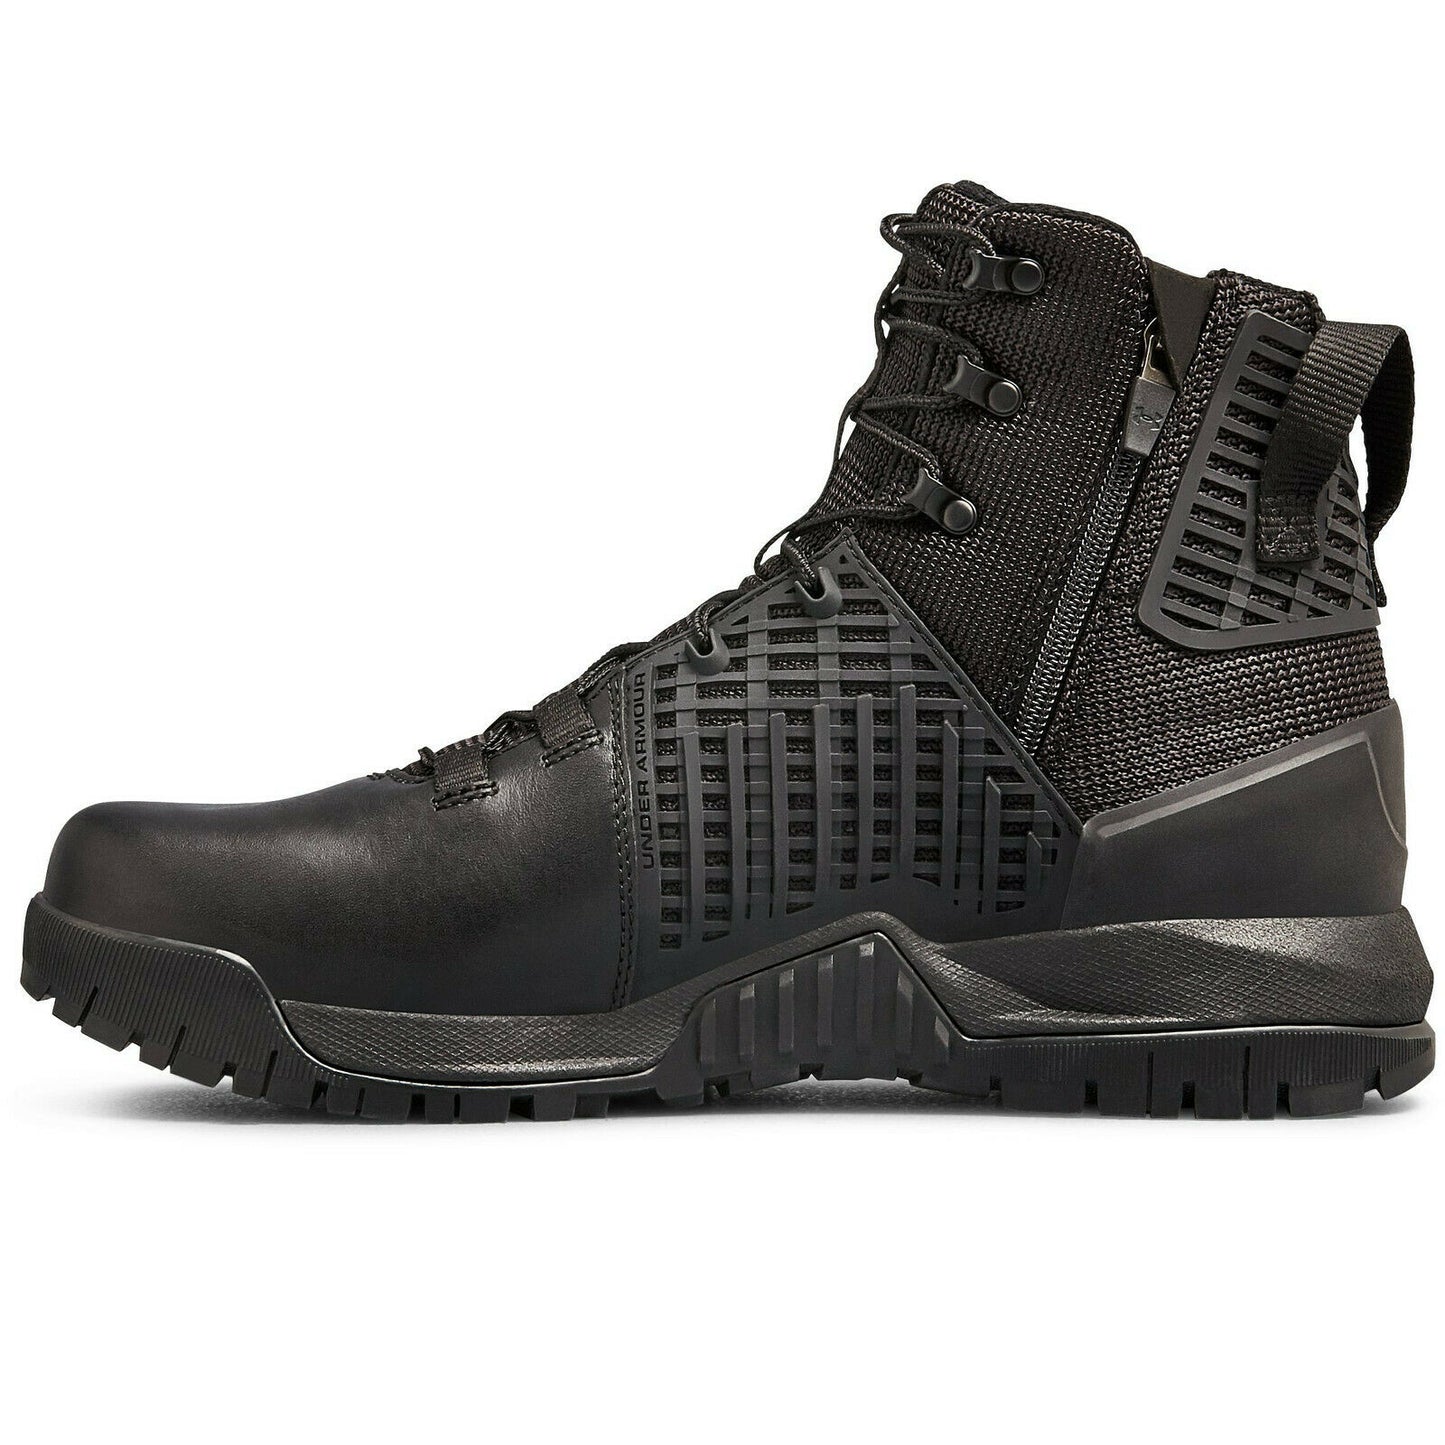 UA Stryker Side-Zip Boot - Under Armour Men’s Tactical Boots in Black